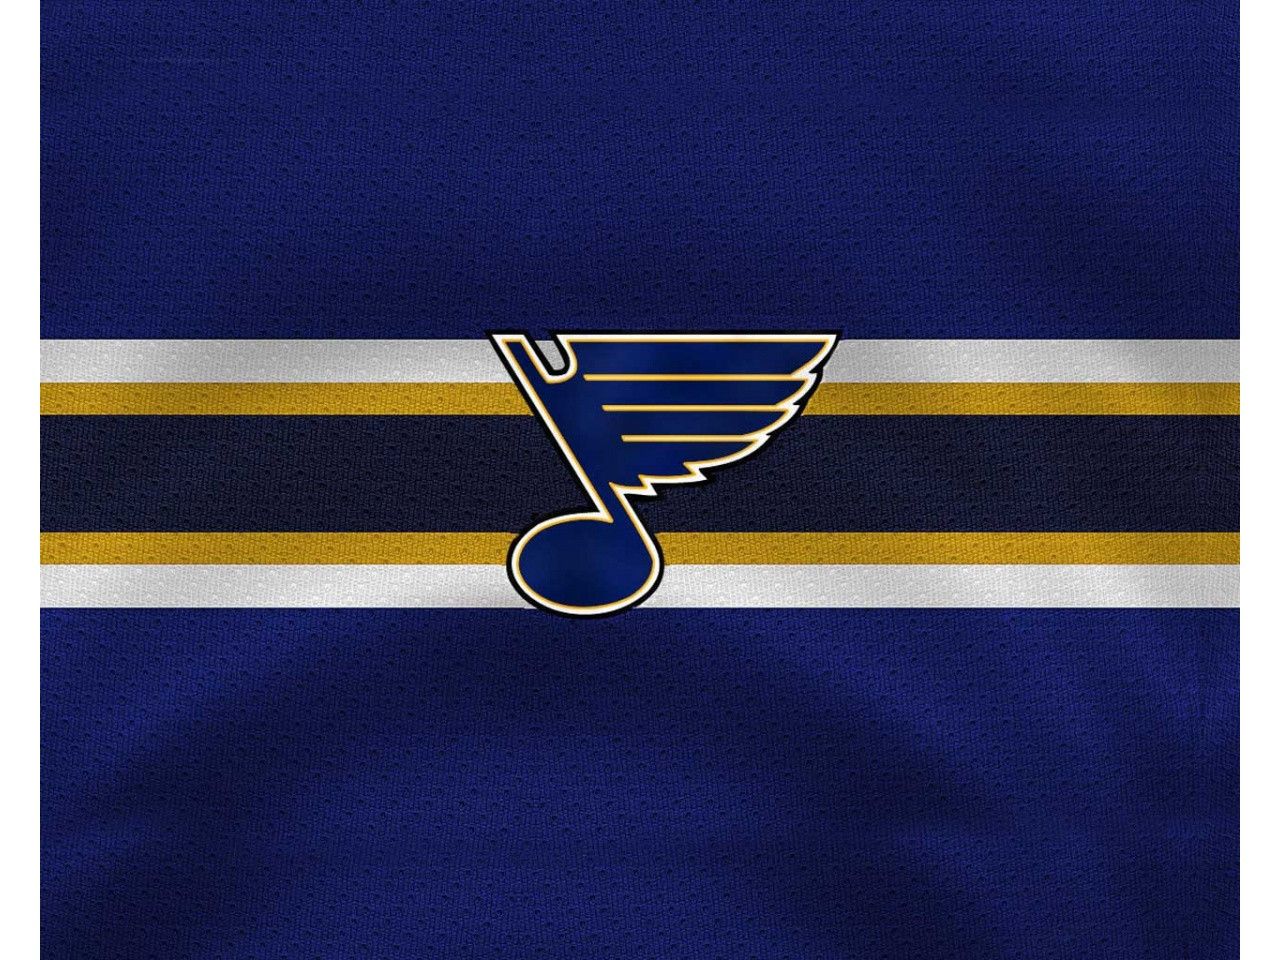 Nhl St Louis Blues iPhone Wallpaper Cover